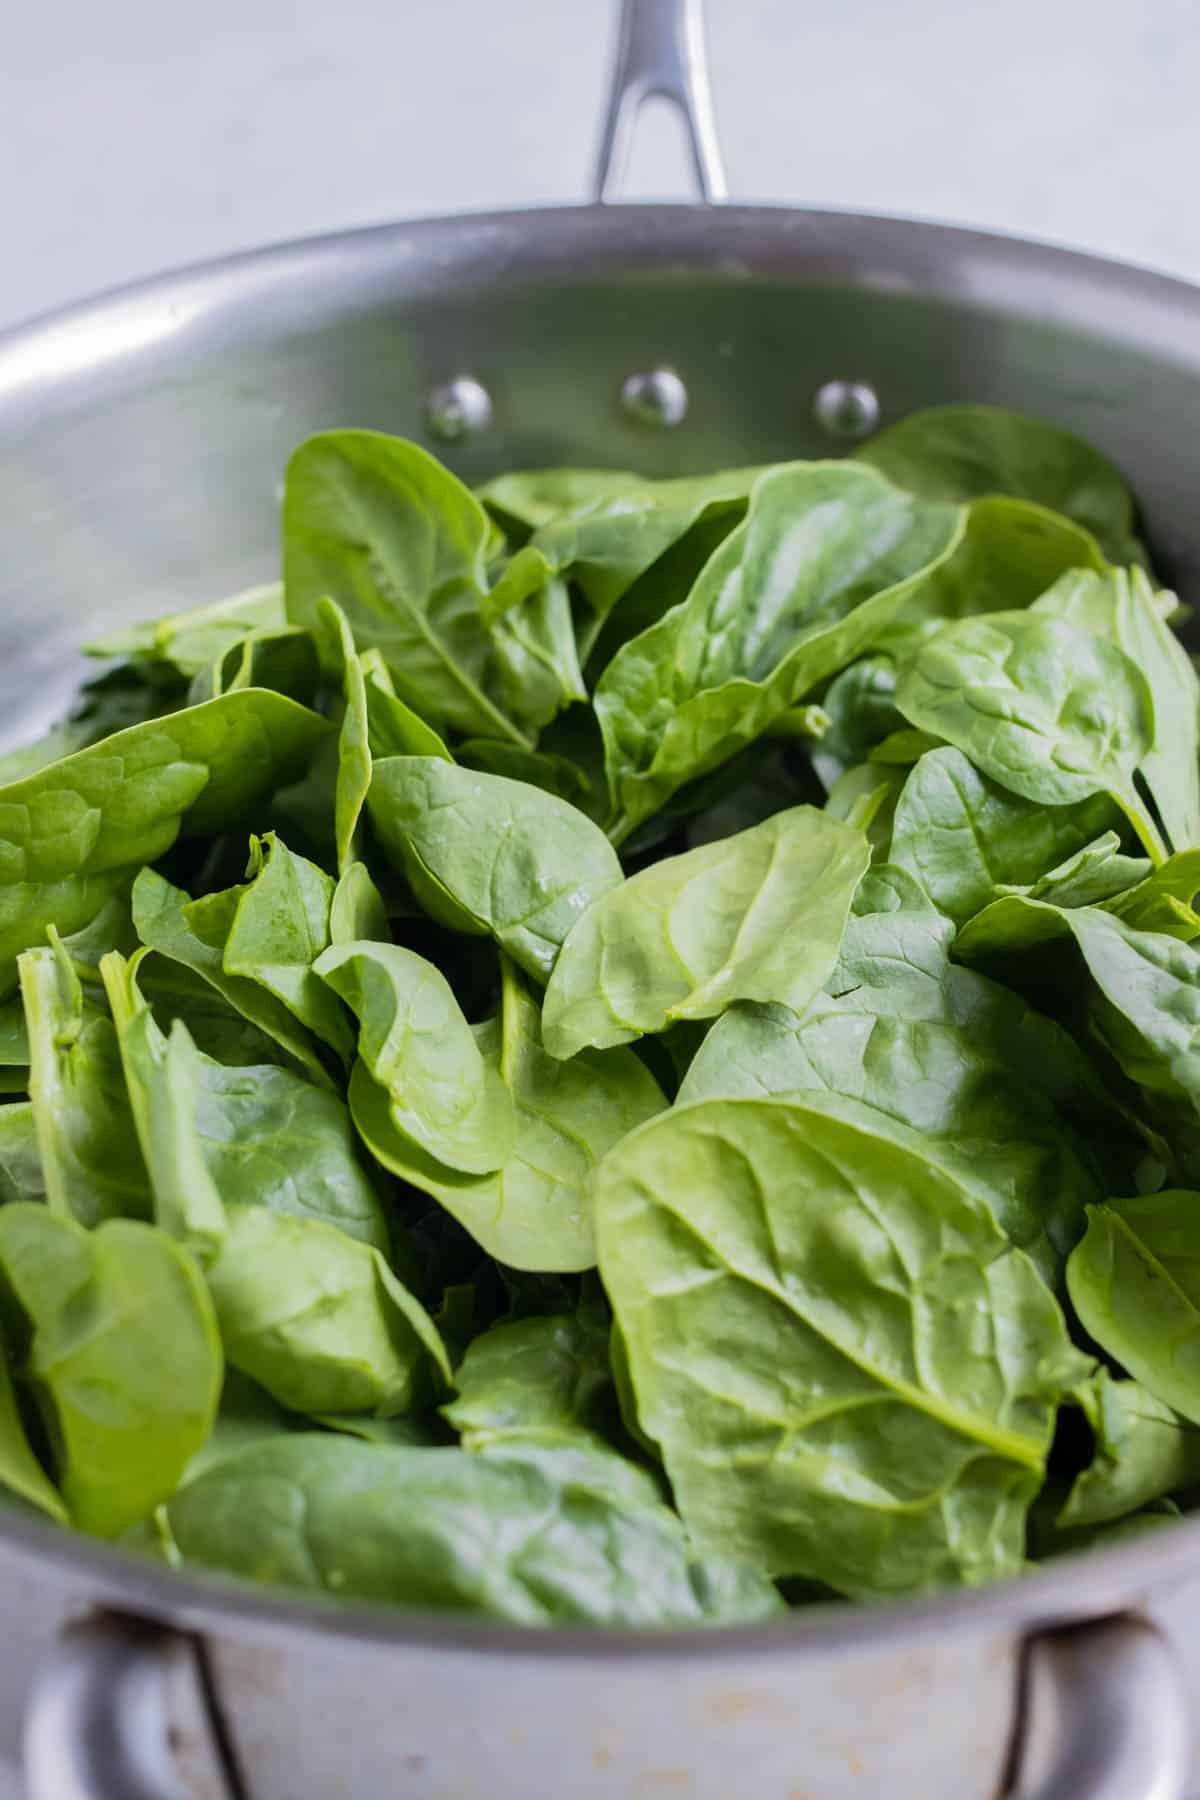 The spinach is added to the pan on the stove.